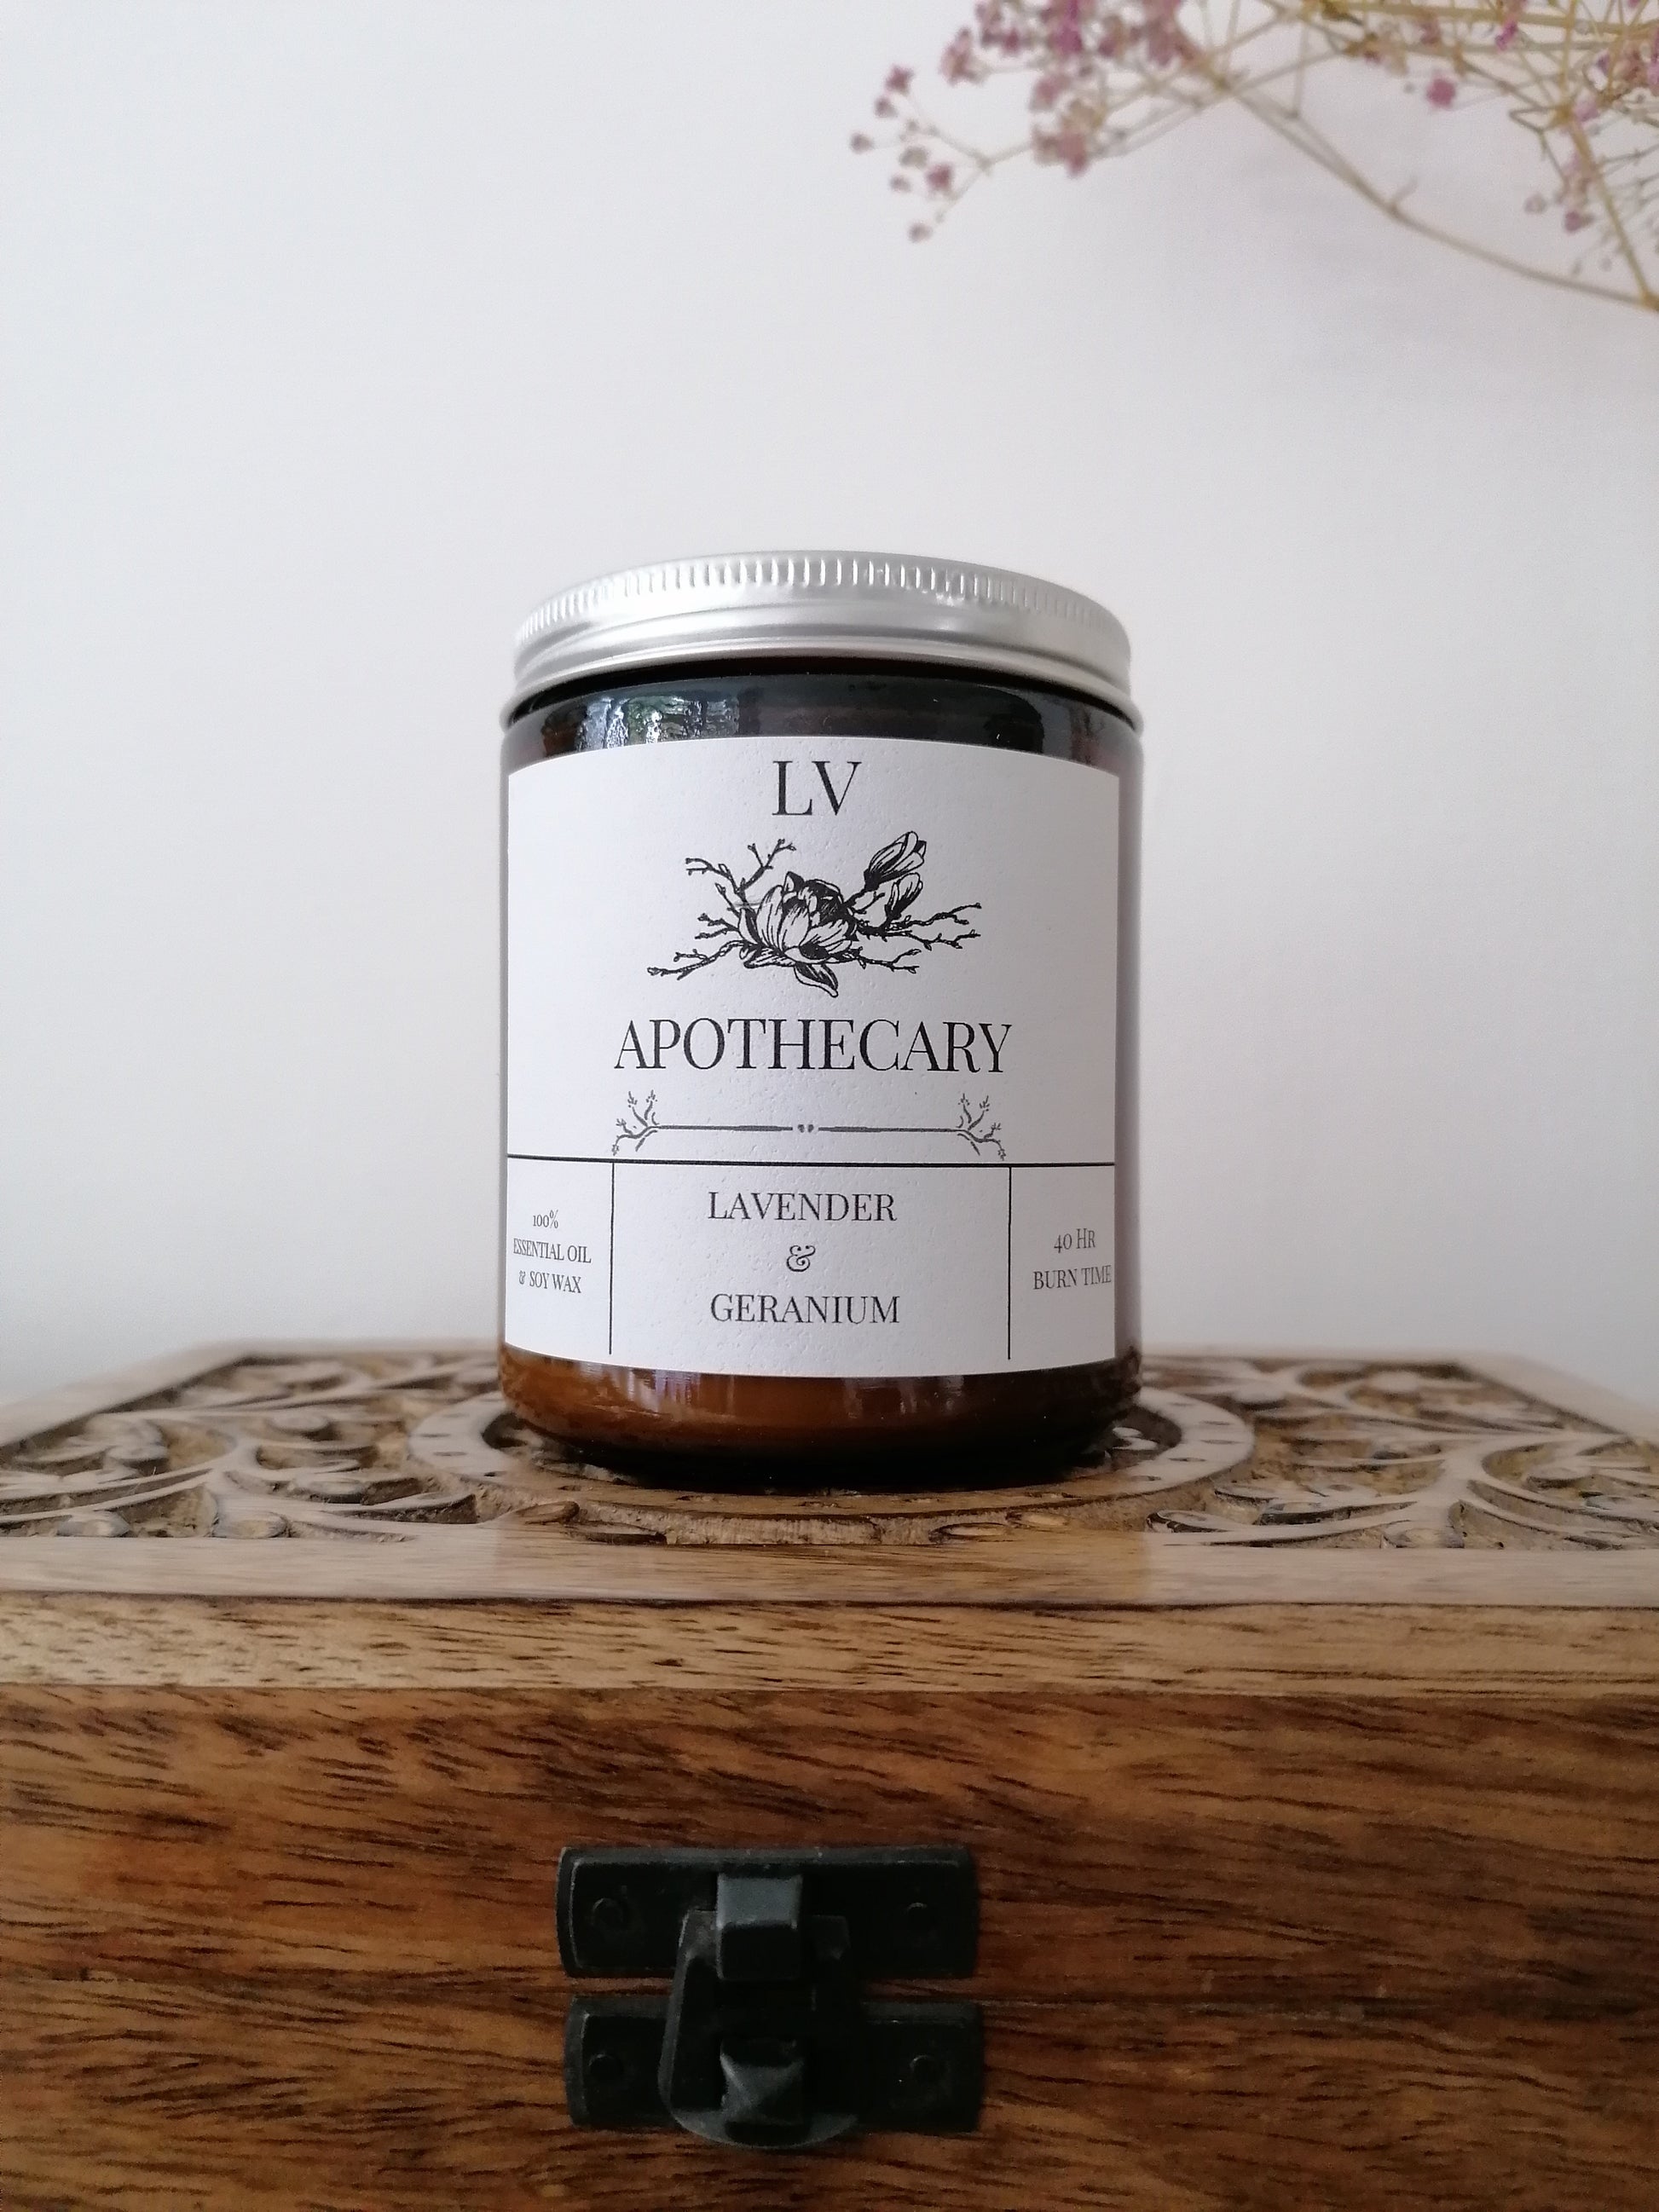 Lavender and Geranium Aromatherapy Candle - LV Apothecary